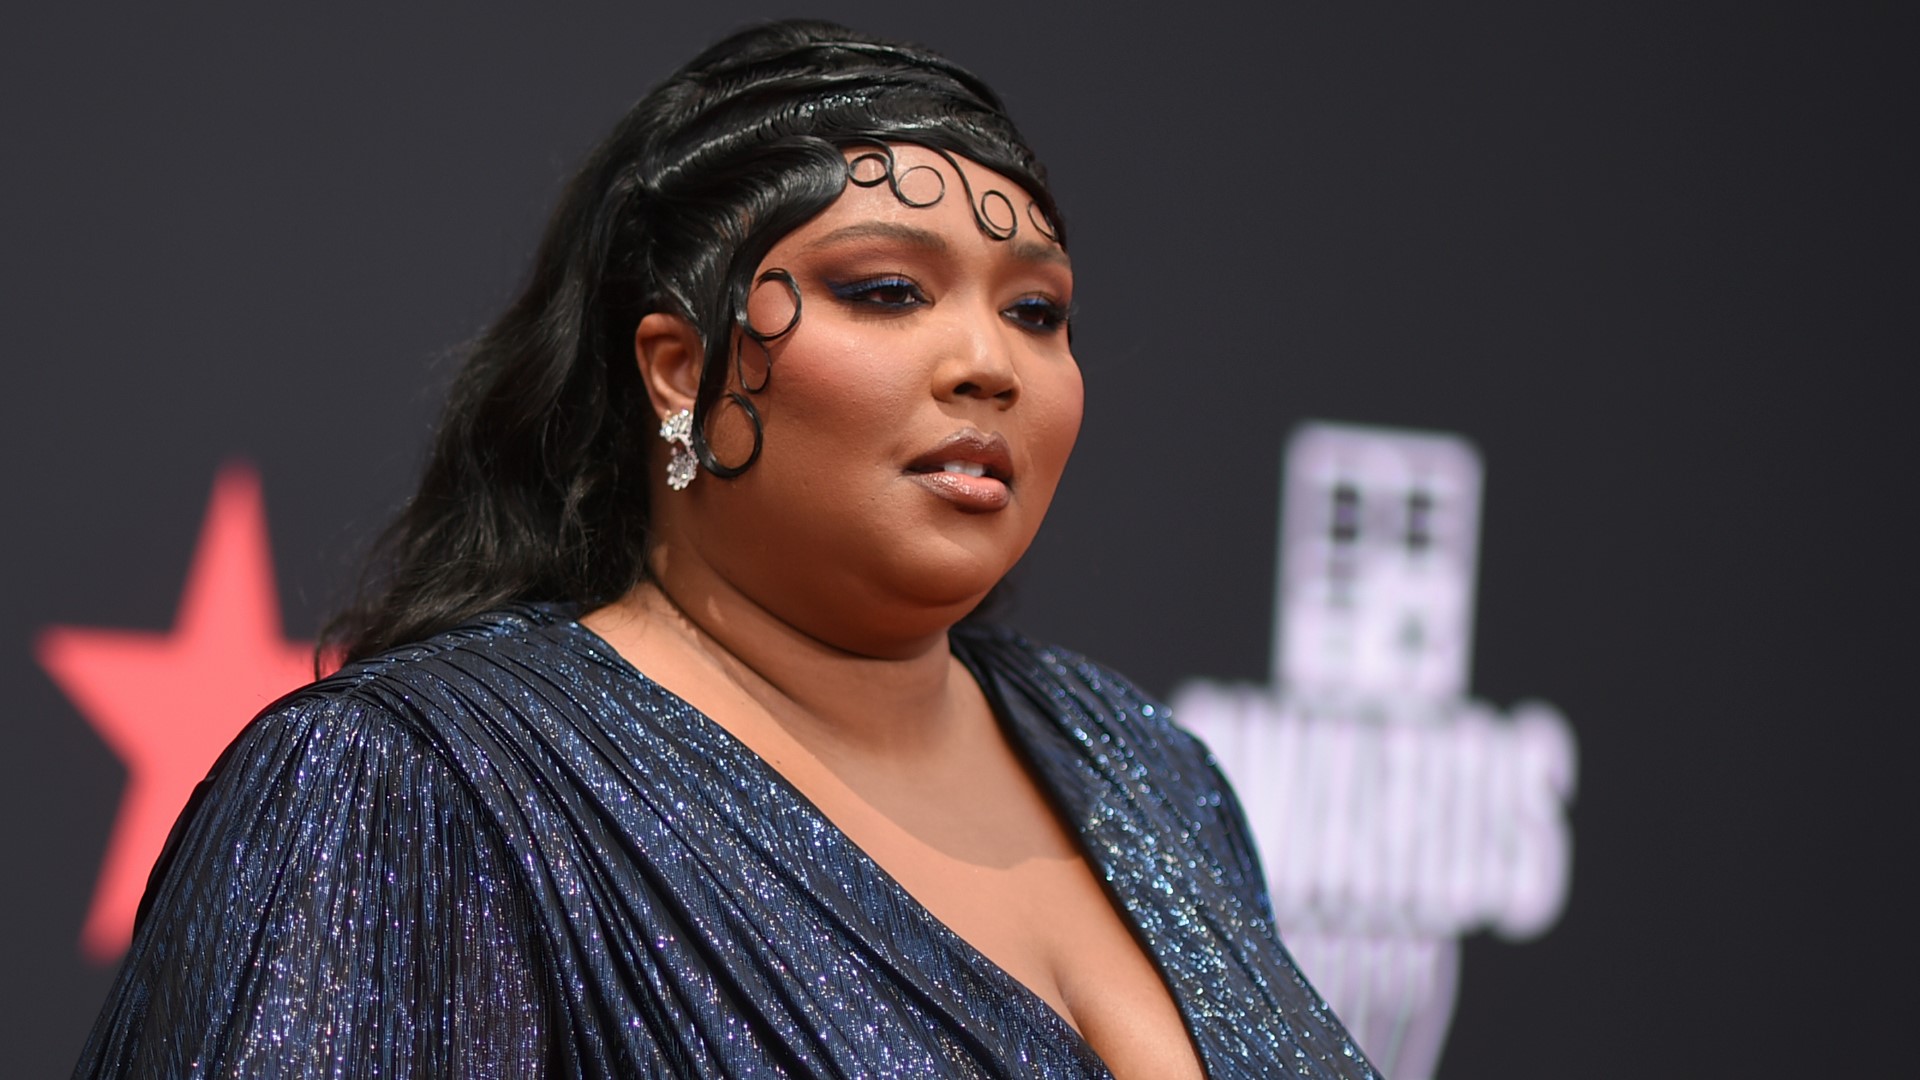 Lizzo has strongly denied the allegations and called them "outrageous" in her own statement.